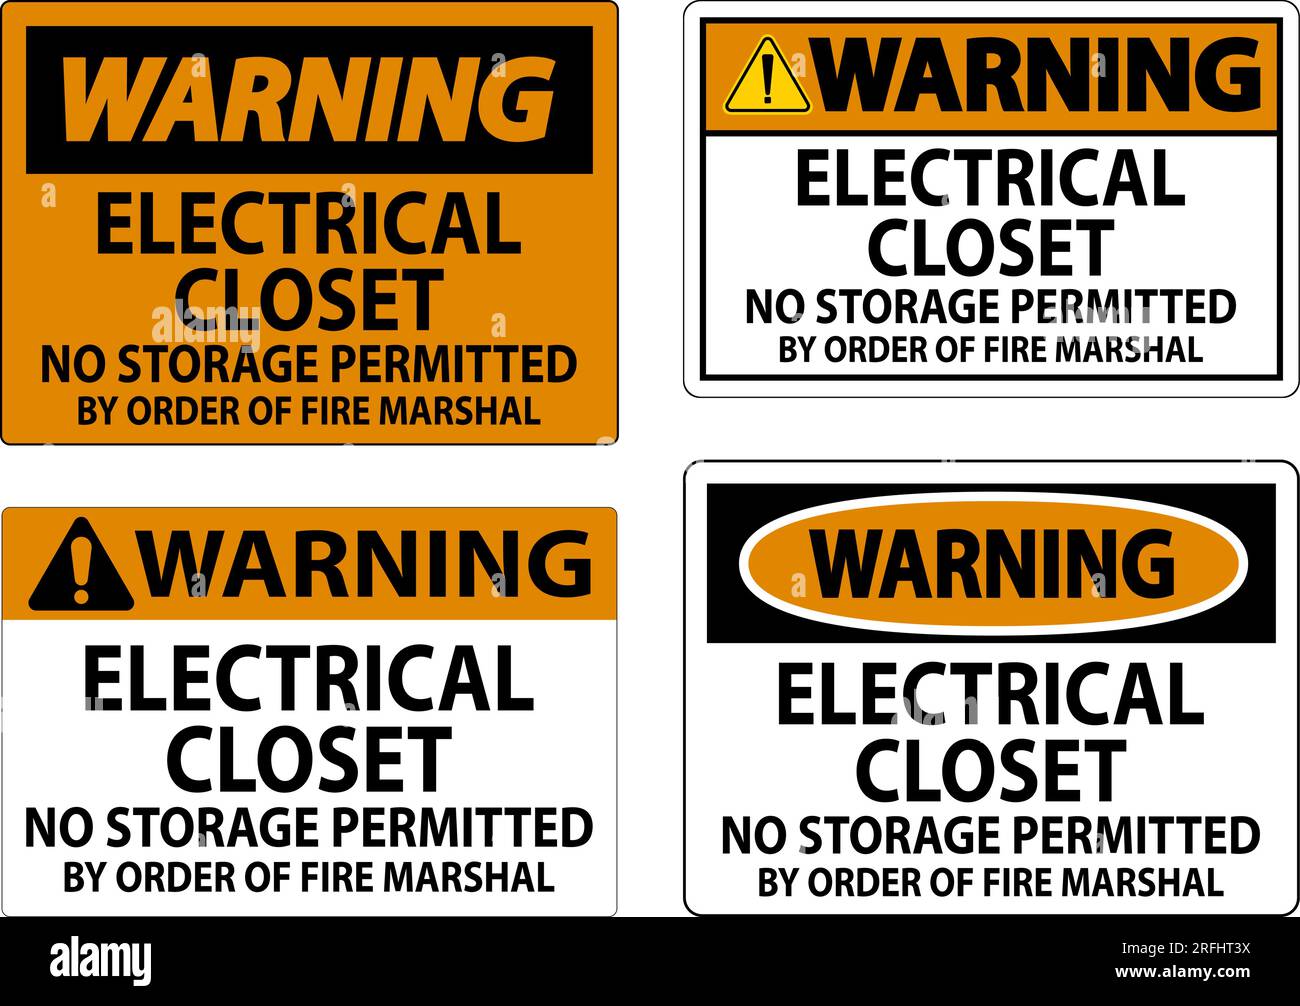 Warning Sign Electrical Closet - No Storage Permitted By Order Of Fire Marshal Stock Vector